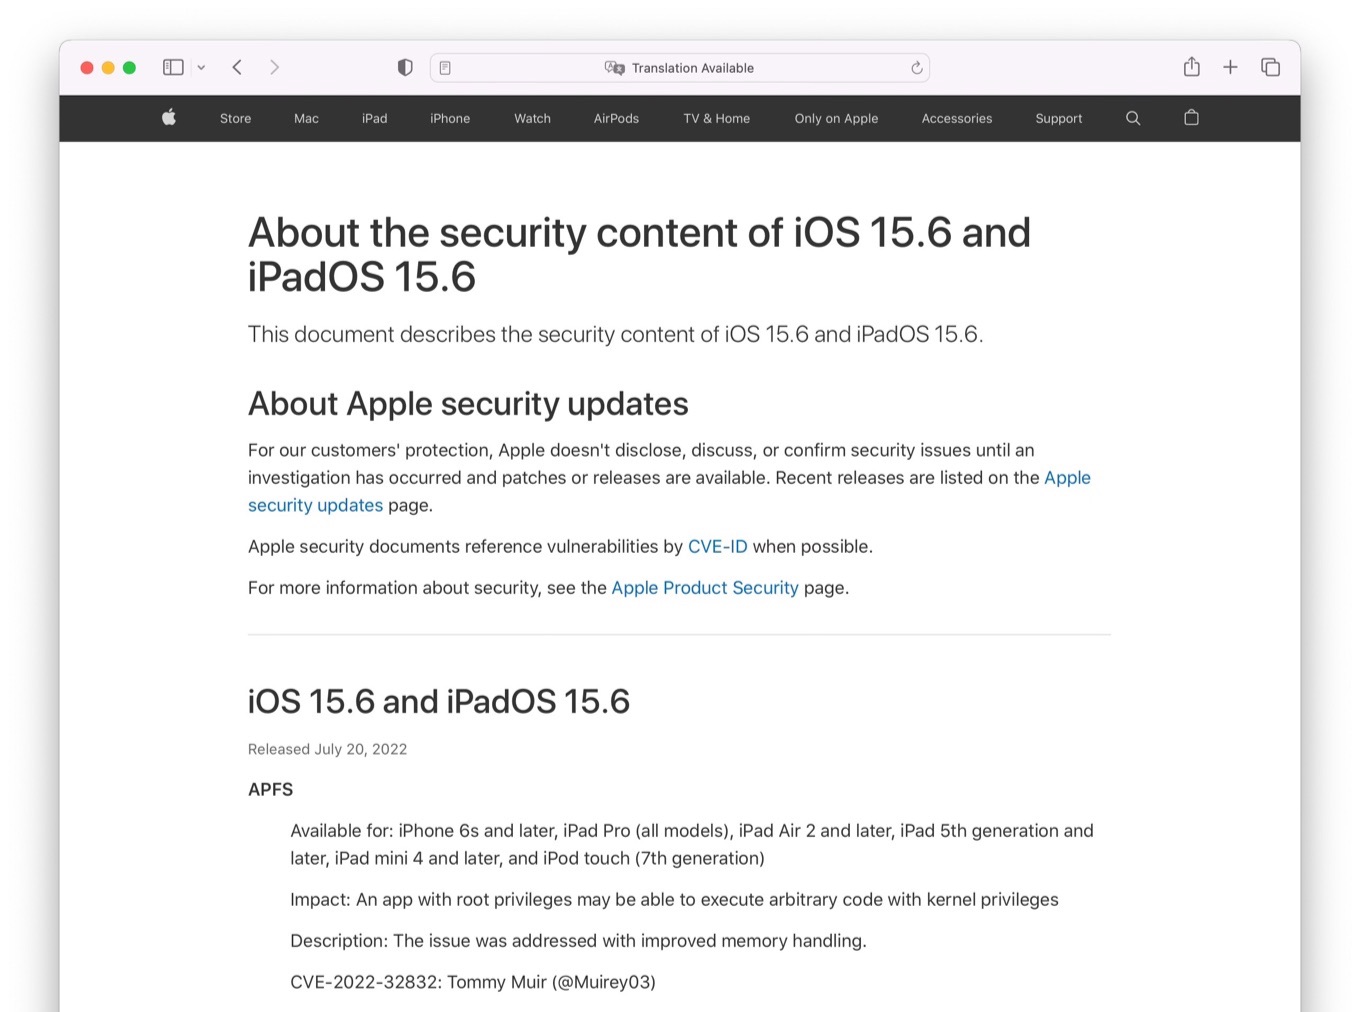 About the security content of iOS 15.6 and iPadOS 15.6